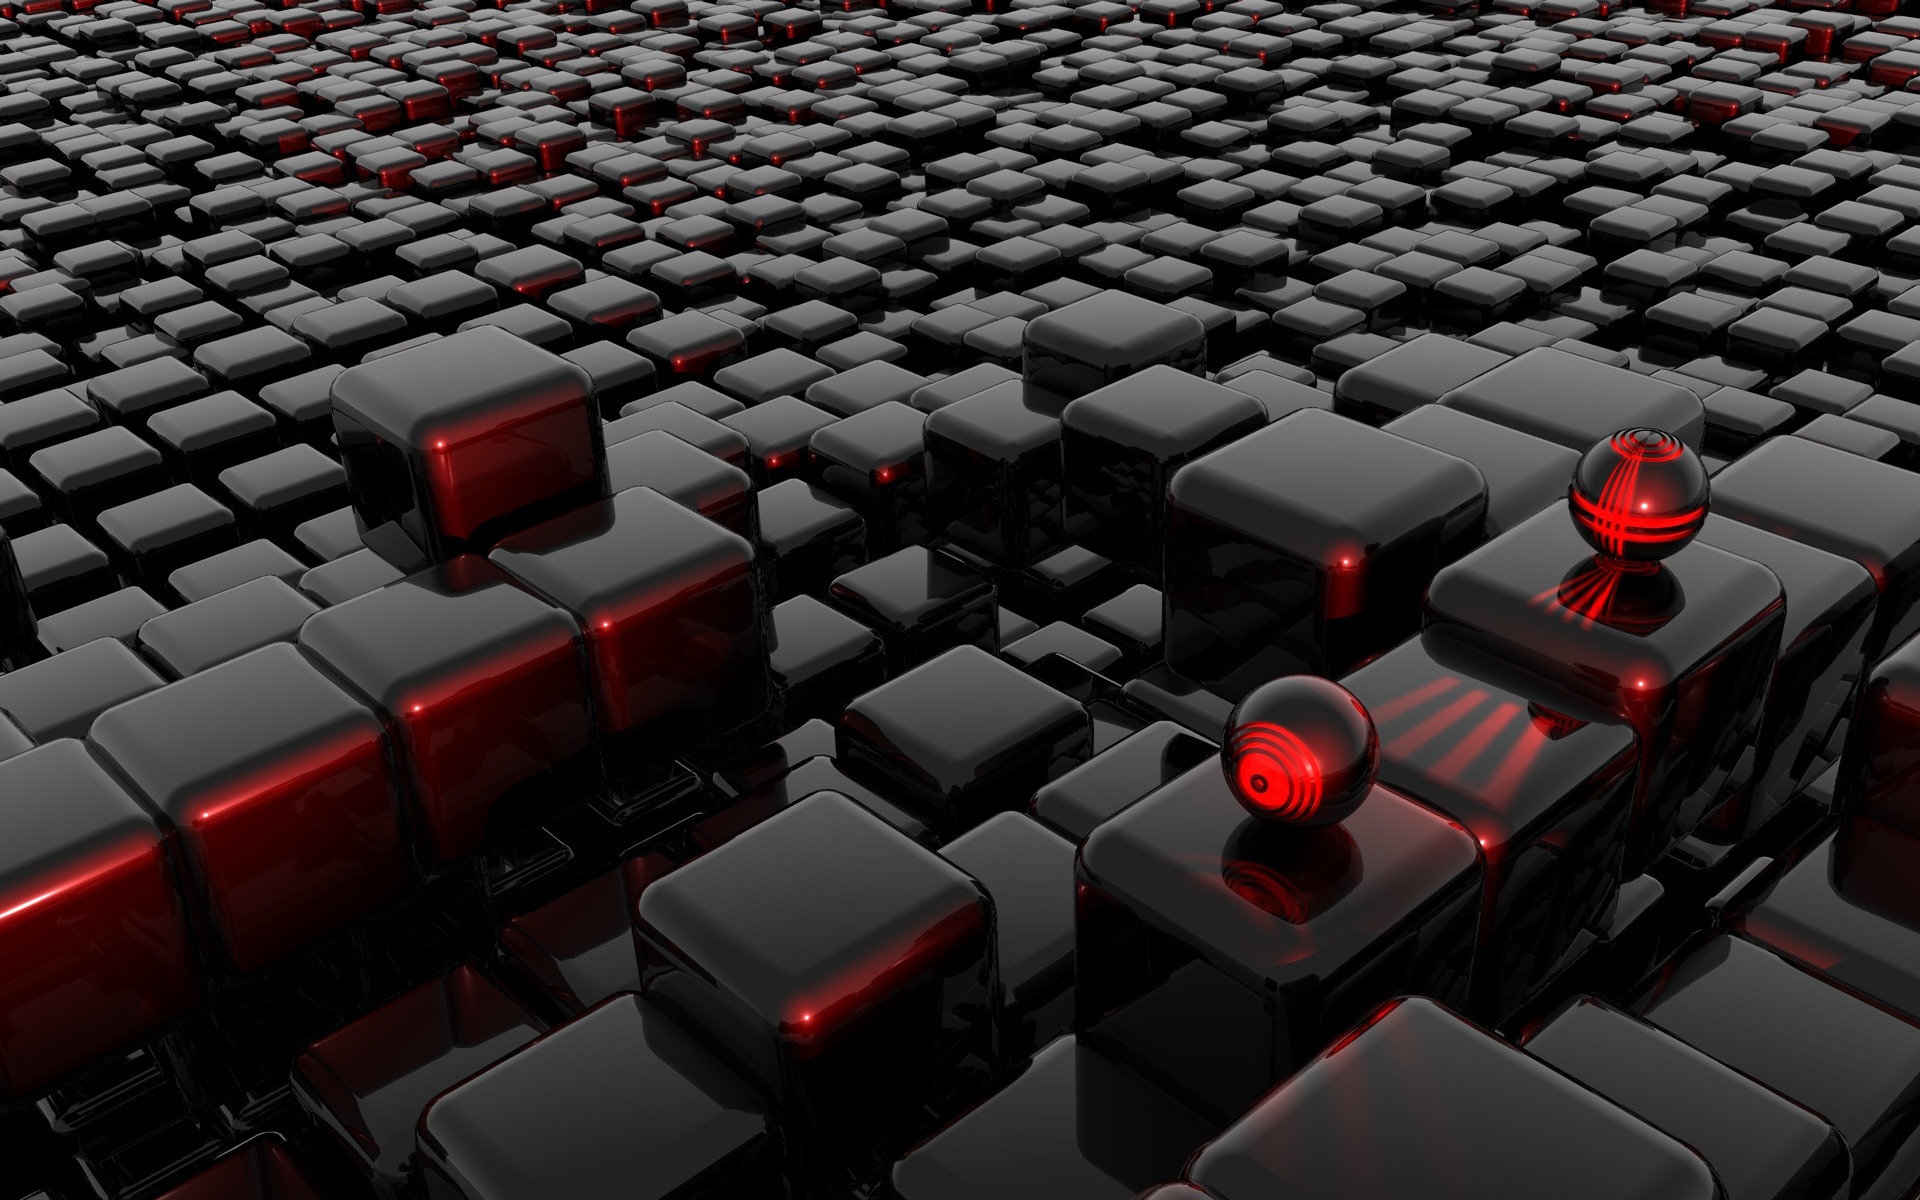 Download The Cube 3D HD Wallpaper 2121 Full Size